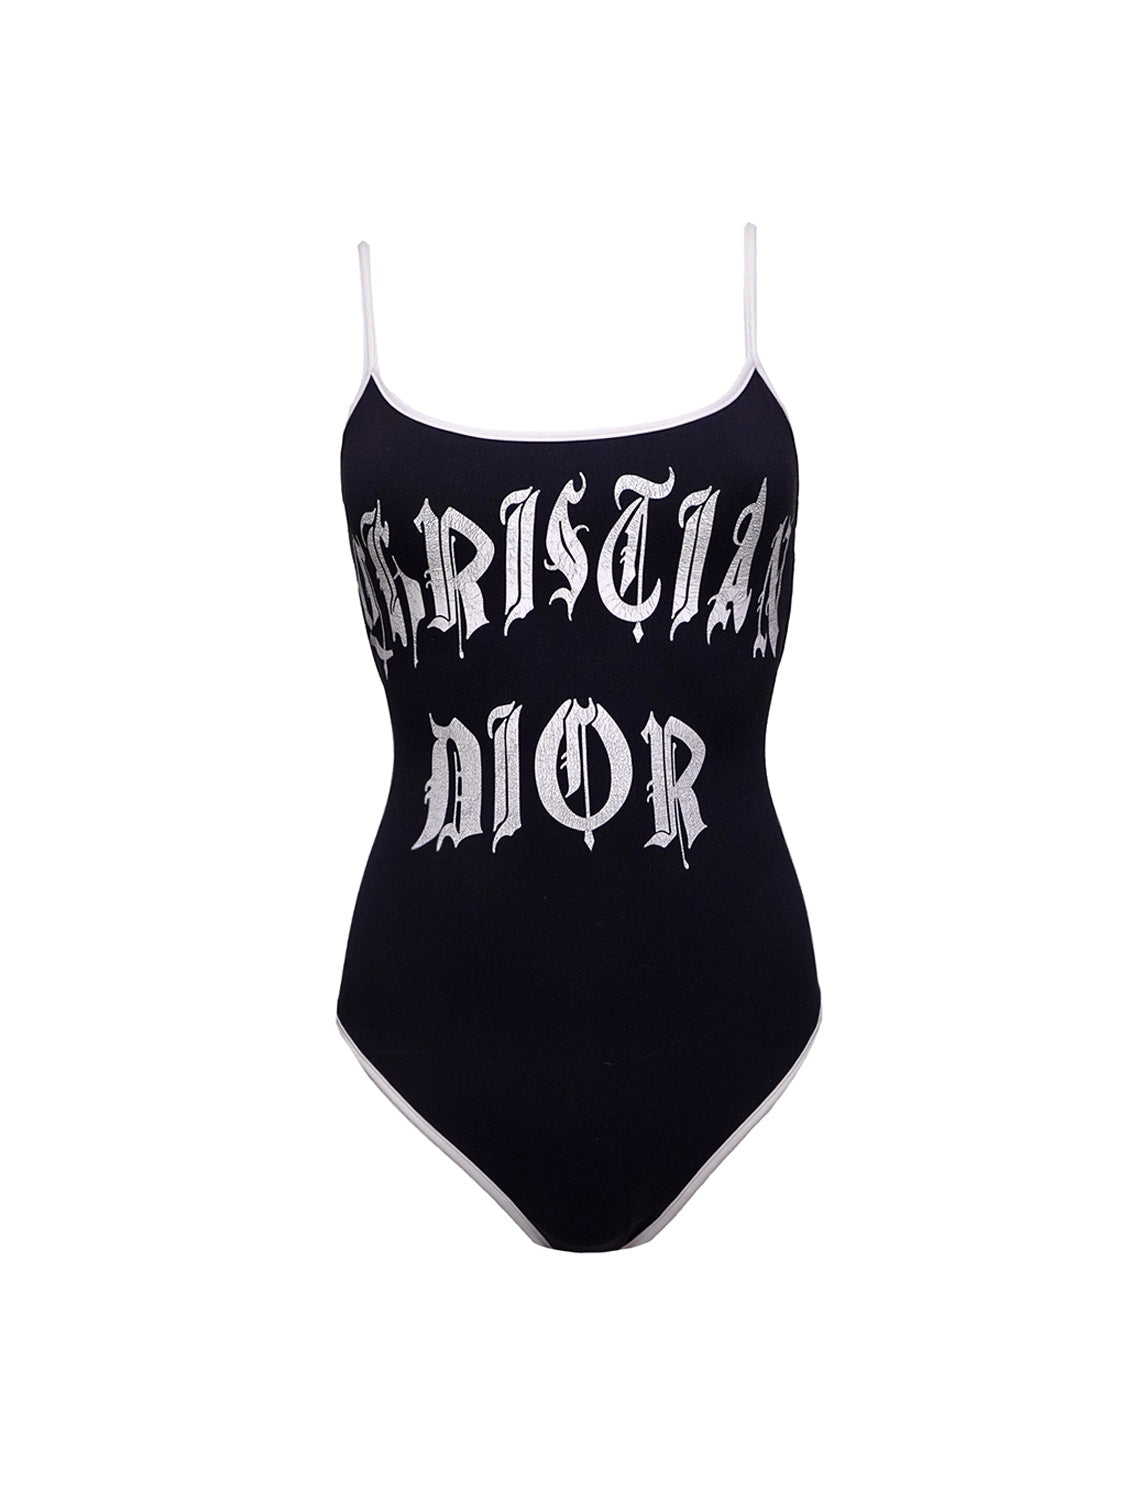 Christian Dior 2000s Galliano Gothic One Piece Swimsuit